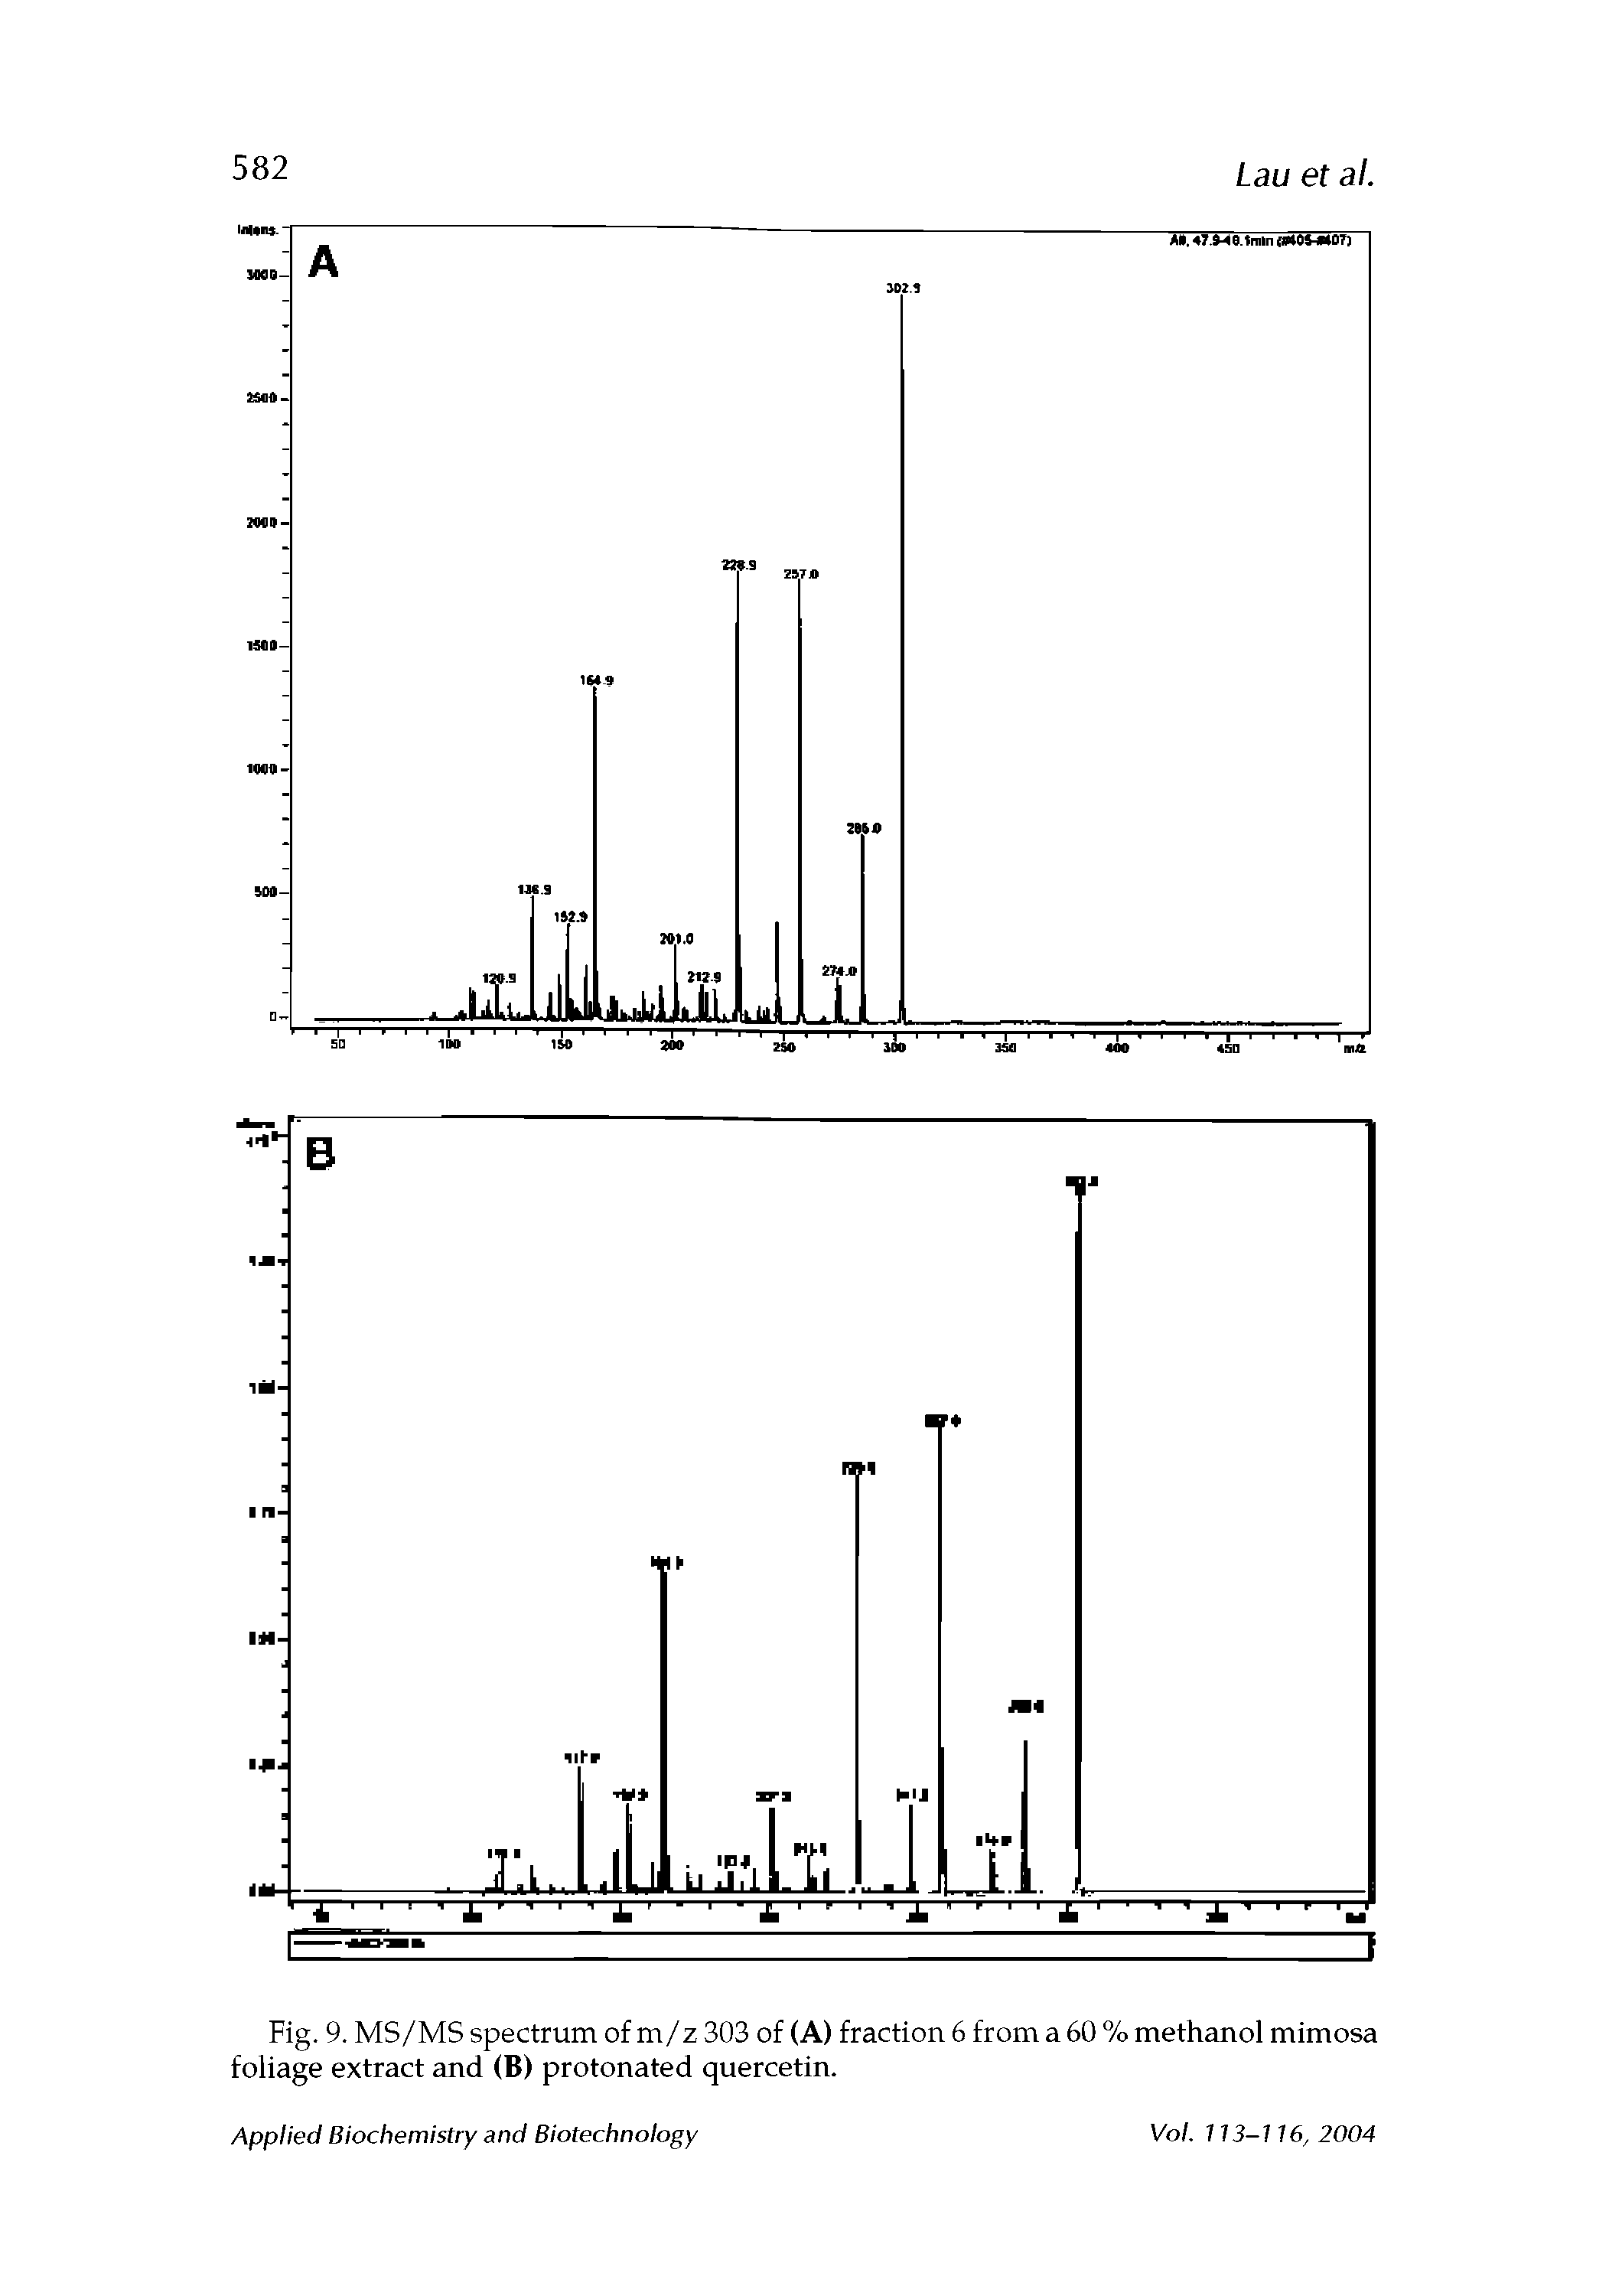 Fig. 9. MS/MS spectrum of m/z 303 of (A) fraction 6 from a 60 % methanol mimosa foliage extract and (B) protonated quercetin.